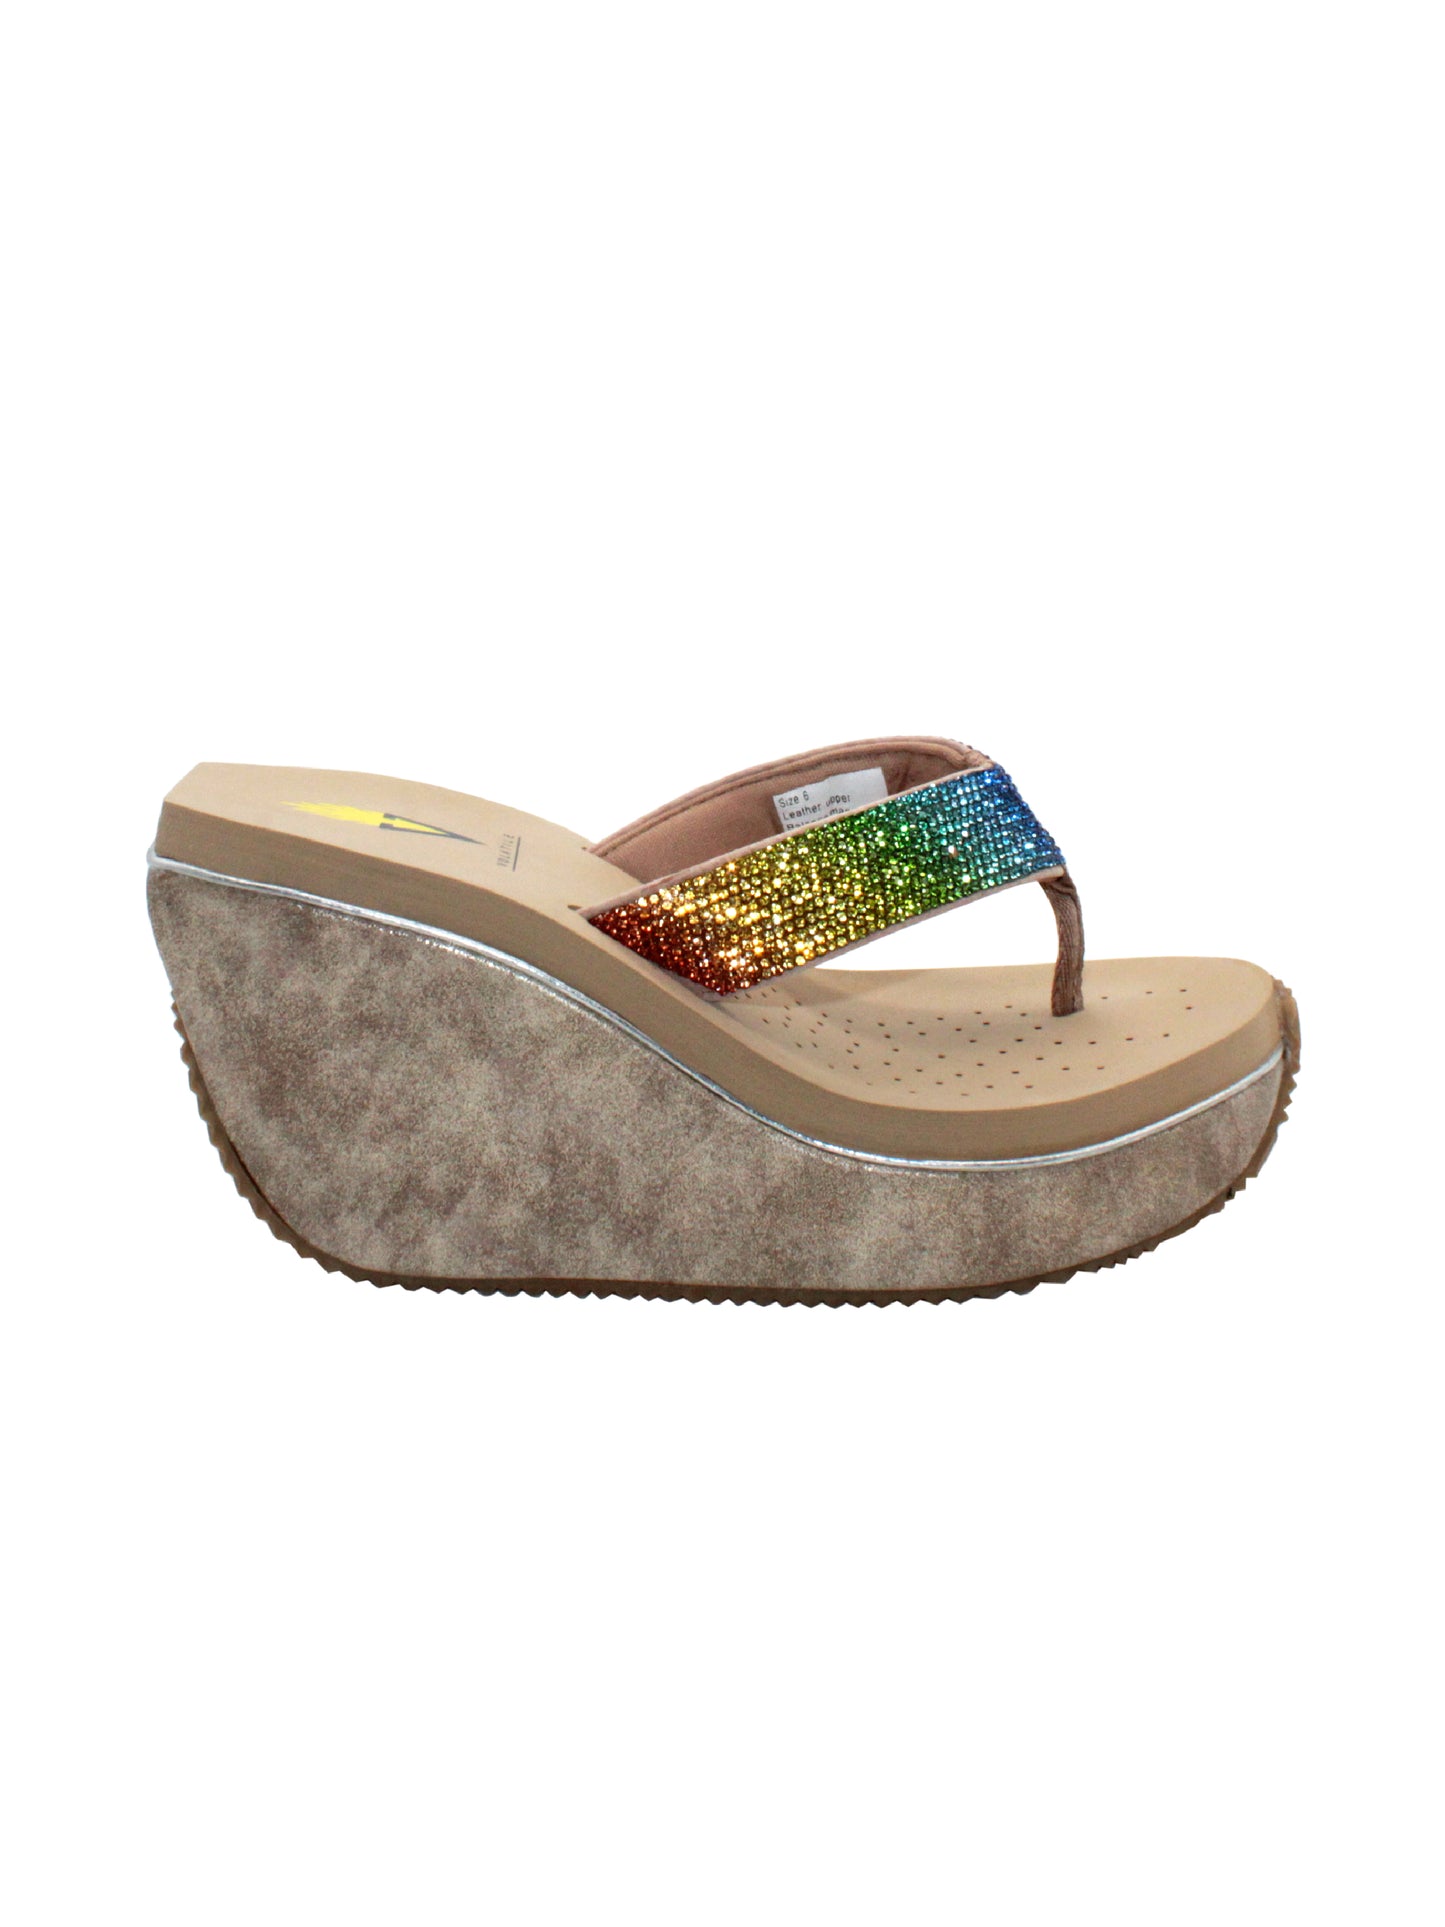 Volatile’s Glimpse platform wedge sandal’s leather upper straps are embellished with sparkling rhinestones. The classic thong style has a soft fabric post that rests gently between your toes, and the signature ultra-comfort EVA insole provides all day comfort. Perfect for special occasions, they’ll complement everything from dresses to jeans. beige multi